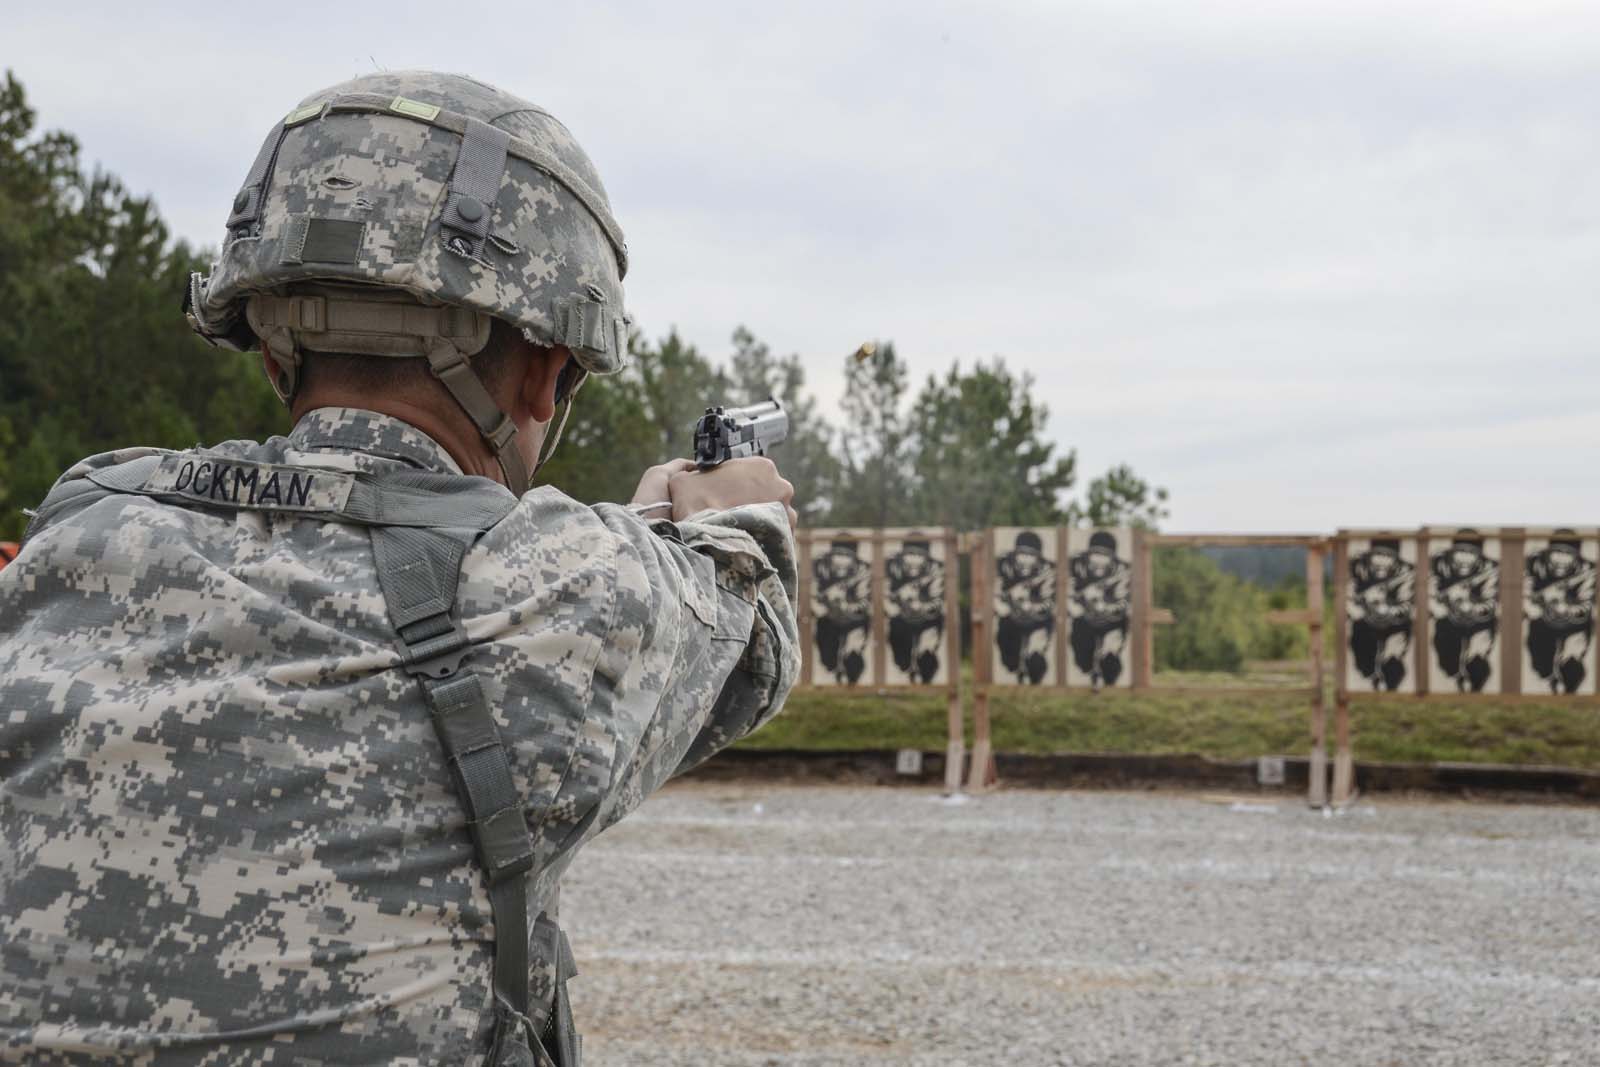 Louisiana National Guard's Spc. Cameron Ockman with B Company, 1st Battalion, 244th Aviation Regiment, fires a 9 mm pistol during the General George Patton match at the Adjutant General's Marksmanship Match at Camp Beauregard in Pineville, Louisiana, Oct. 20, 2017. Ockman and 73 other Airmen and Soldiers competed over the course of two days for a spot in the Governor's Twenty. (U.S. Army National Guard photo by Sgt. Noshoba Davis)